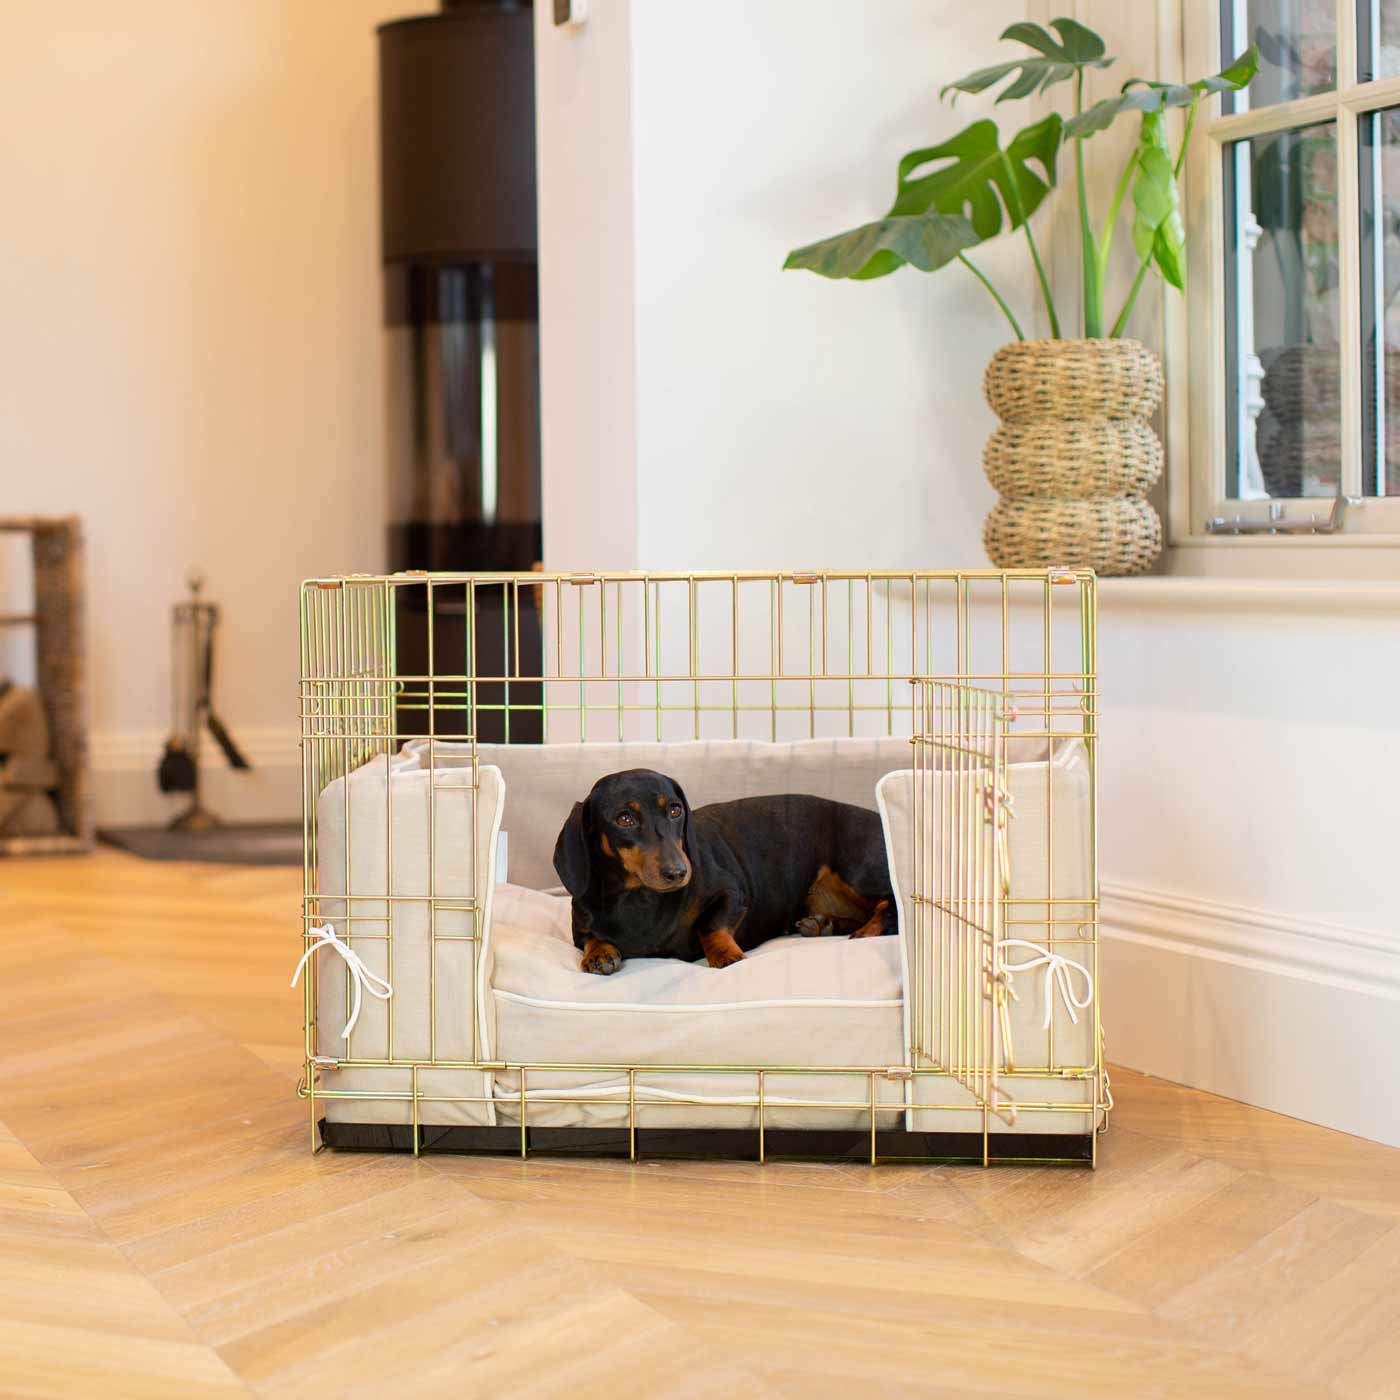 Luxury Dog Cage Bumper, Savanna Oatmeal Cage Bumper Cover The Perfect Dog Cage Accessory, Available To Personalize Now at Lords & Labradors US